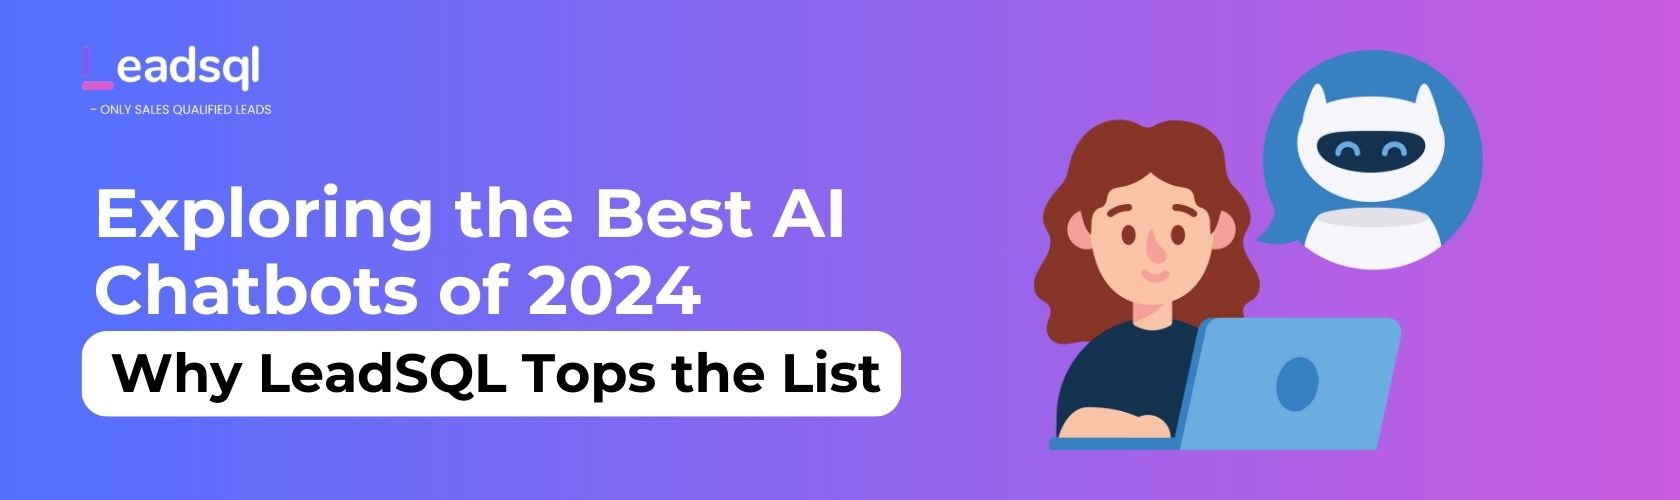 Exploring the Best AI Chatbots of 2024: Why LeadSQL Tops the List